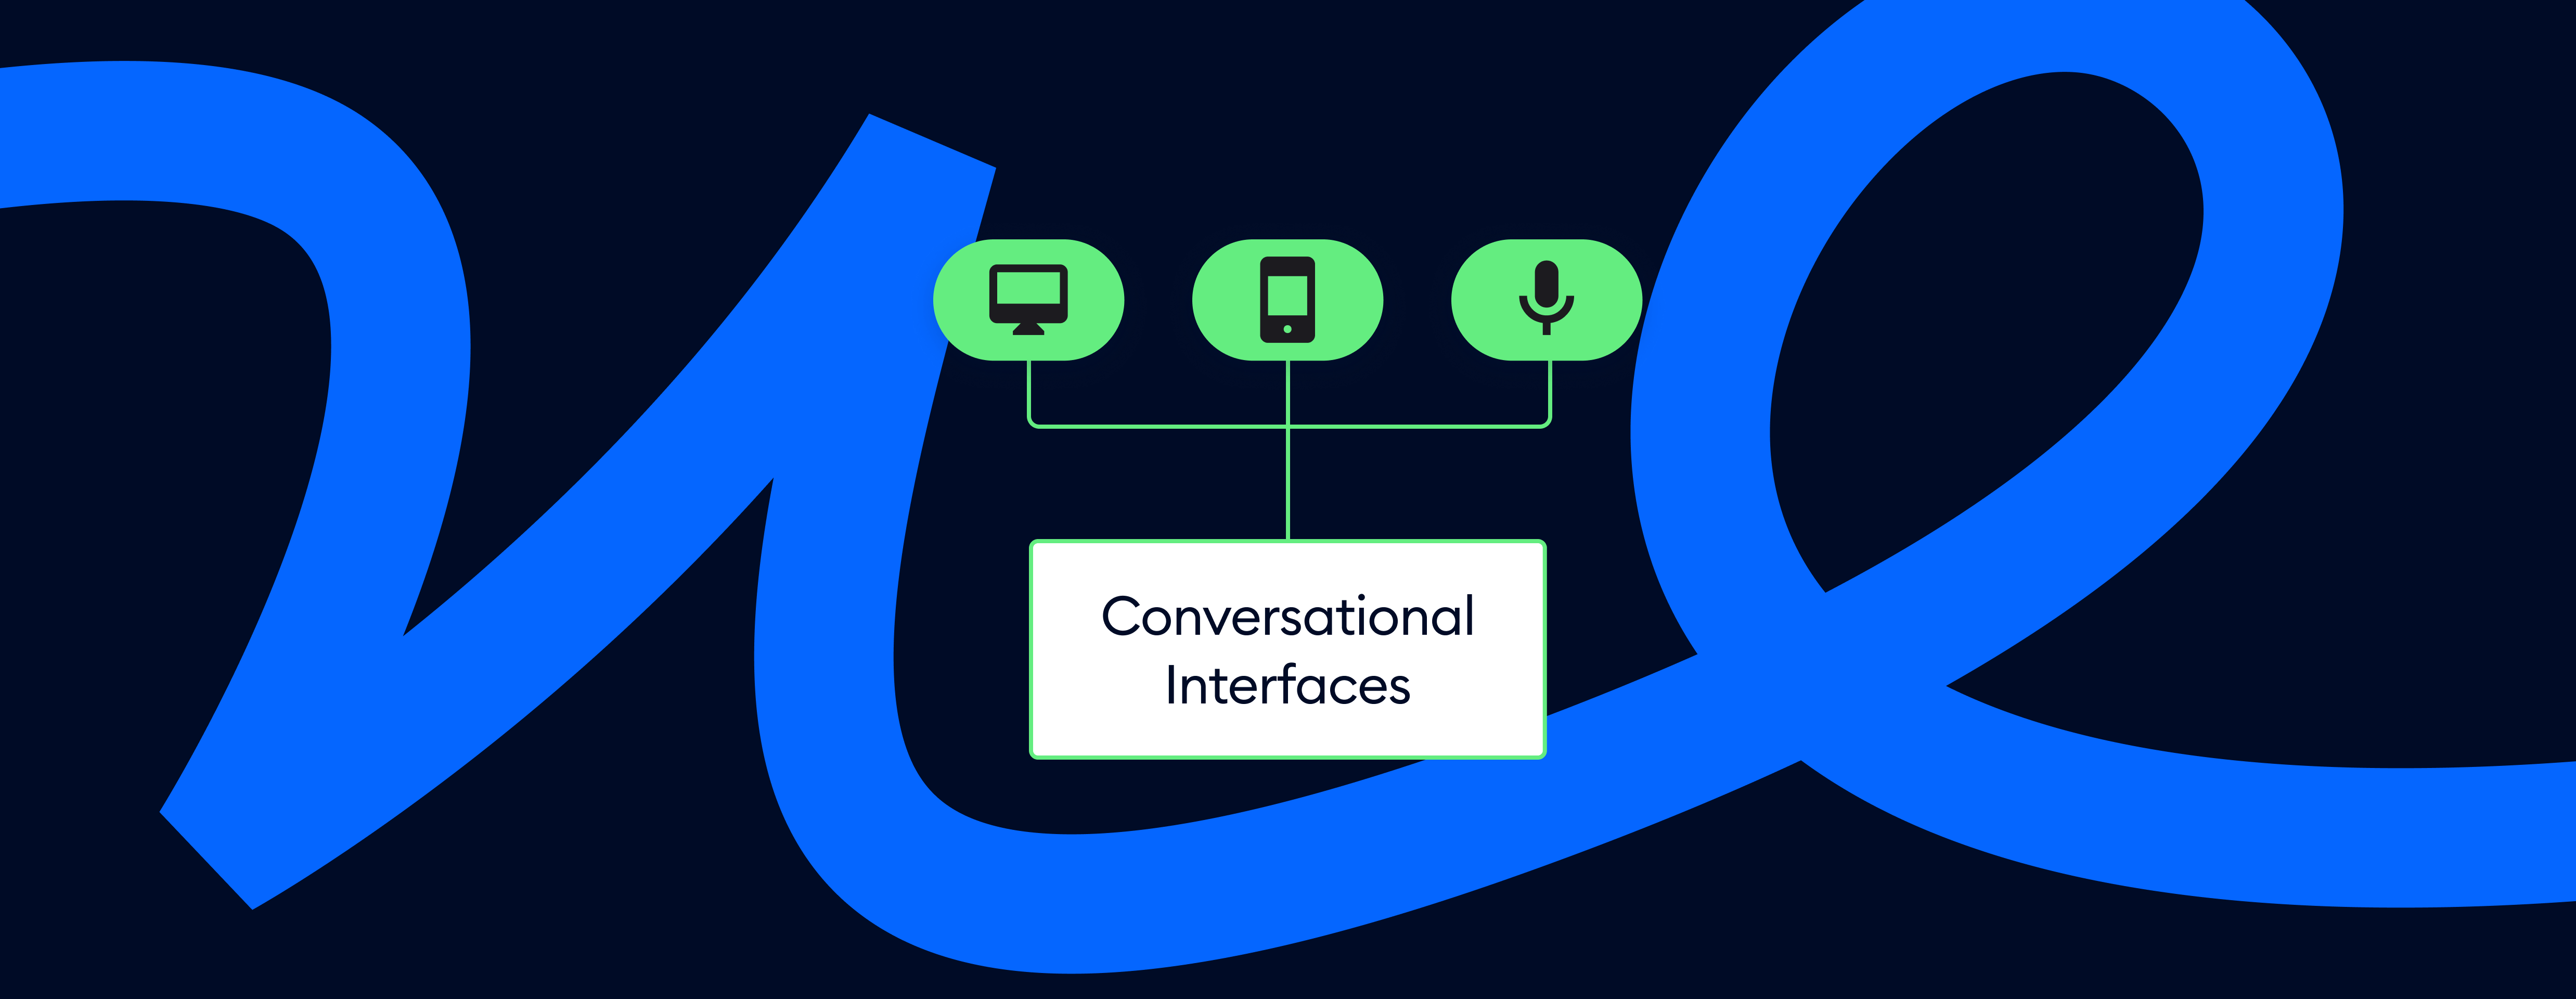 conversational interfaces cover image